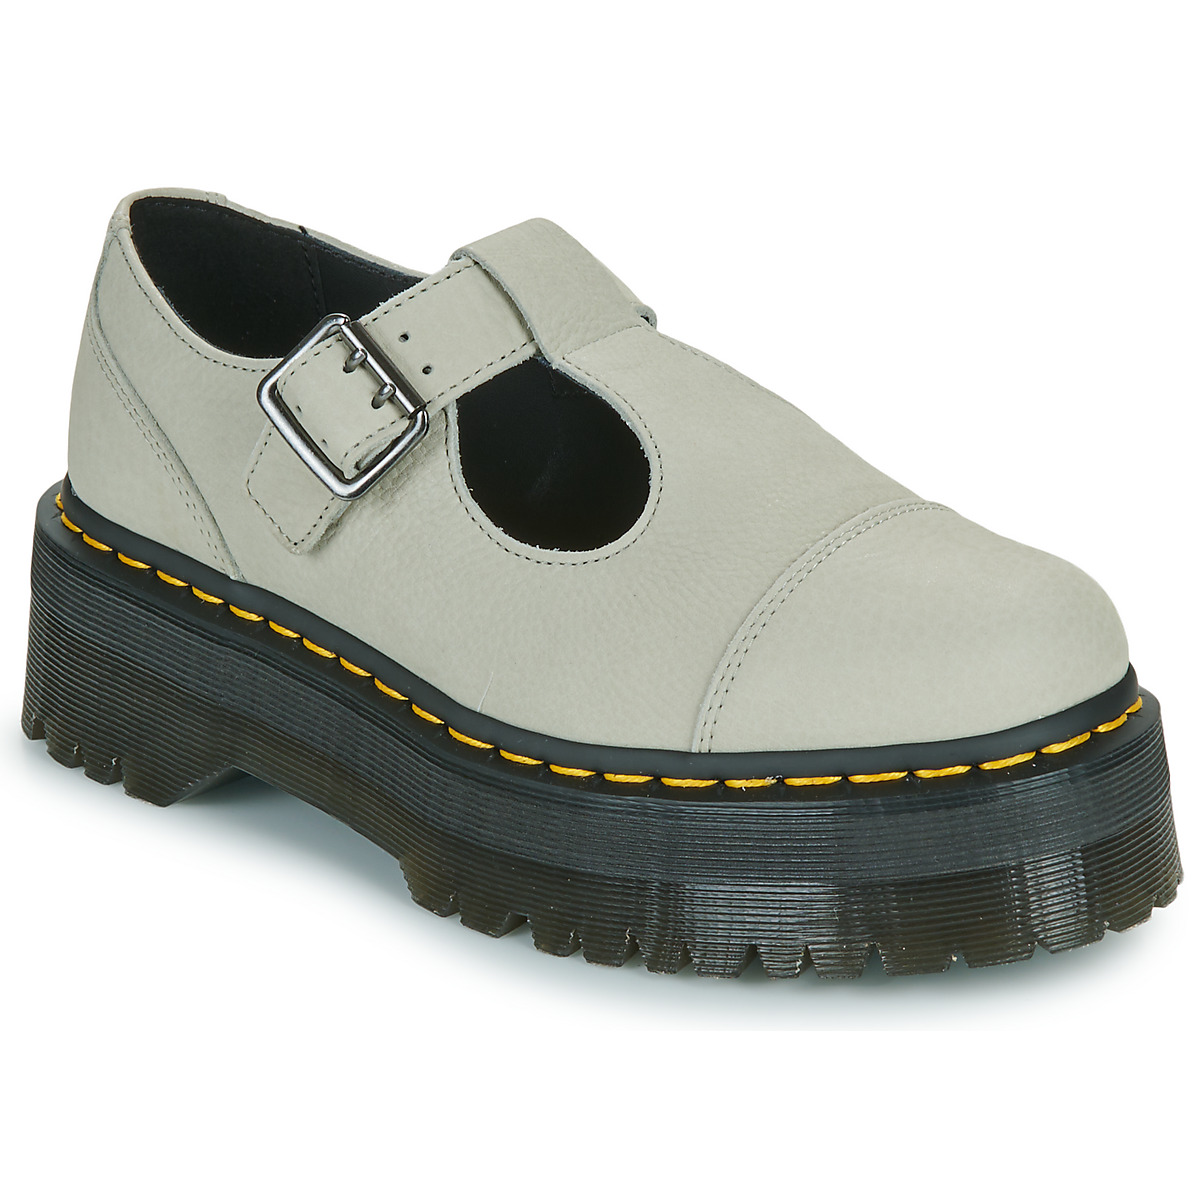 Dr Martens Bethan Smoked Mint Tumbled Nubuck Beige